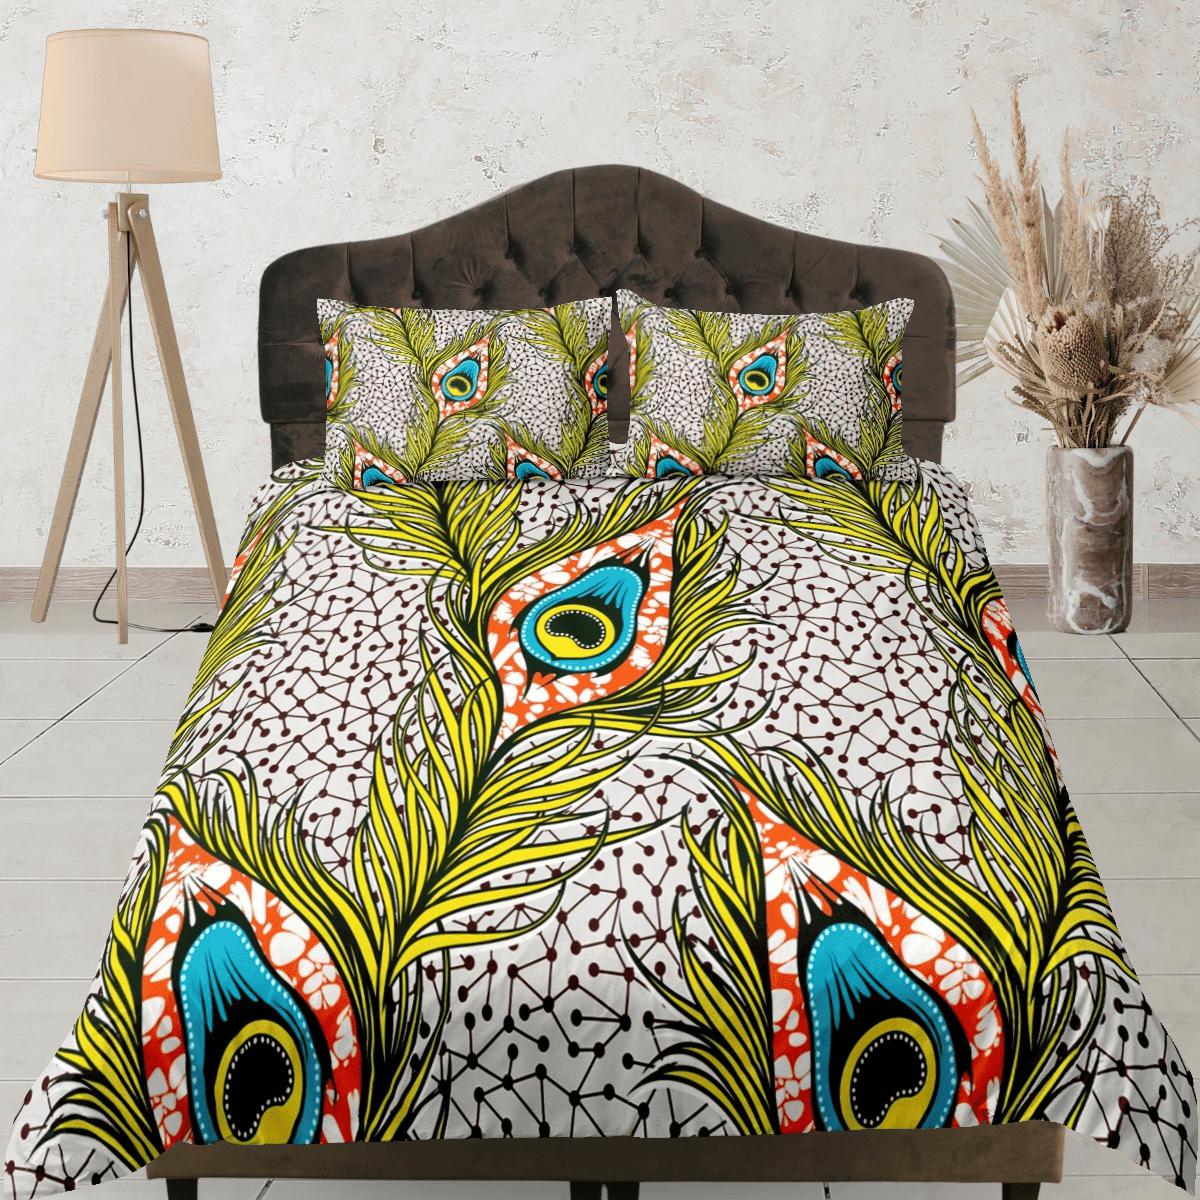 daintyduvet Colorful peacock feather african bedding set duvet cover, boho bedding peacock decor ethnic afrocentric designer bedding, south african gift